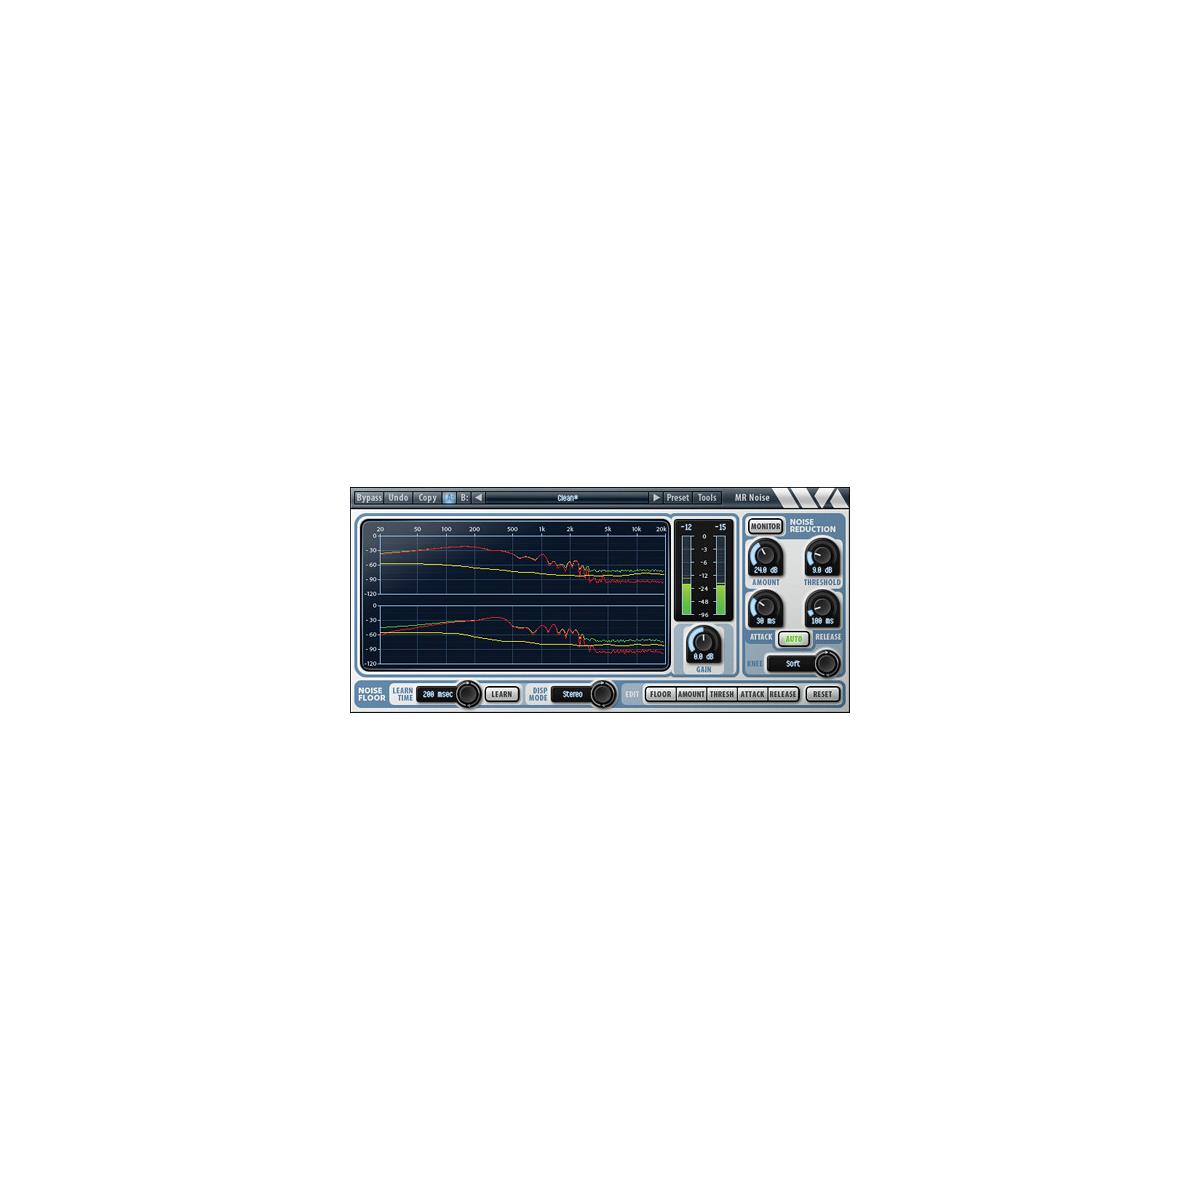 Wave Arts MR Noise Broadband Noise Reduction Native Plug-In, Electronic Download -  11-33026